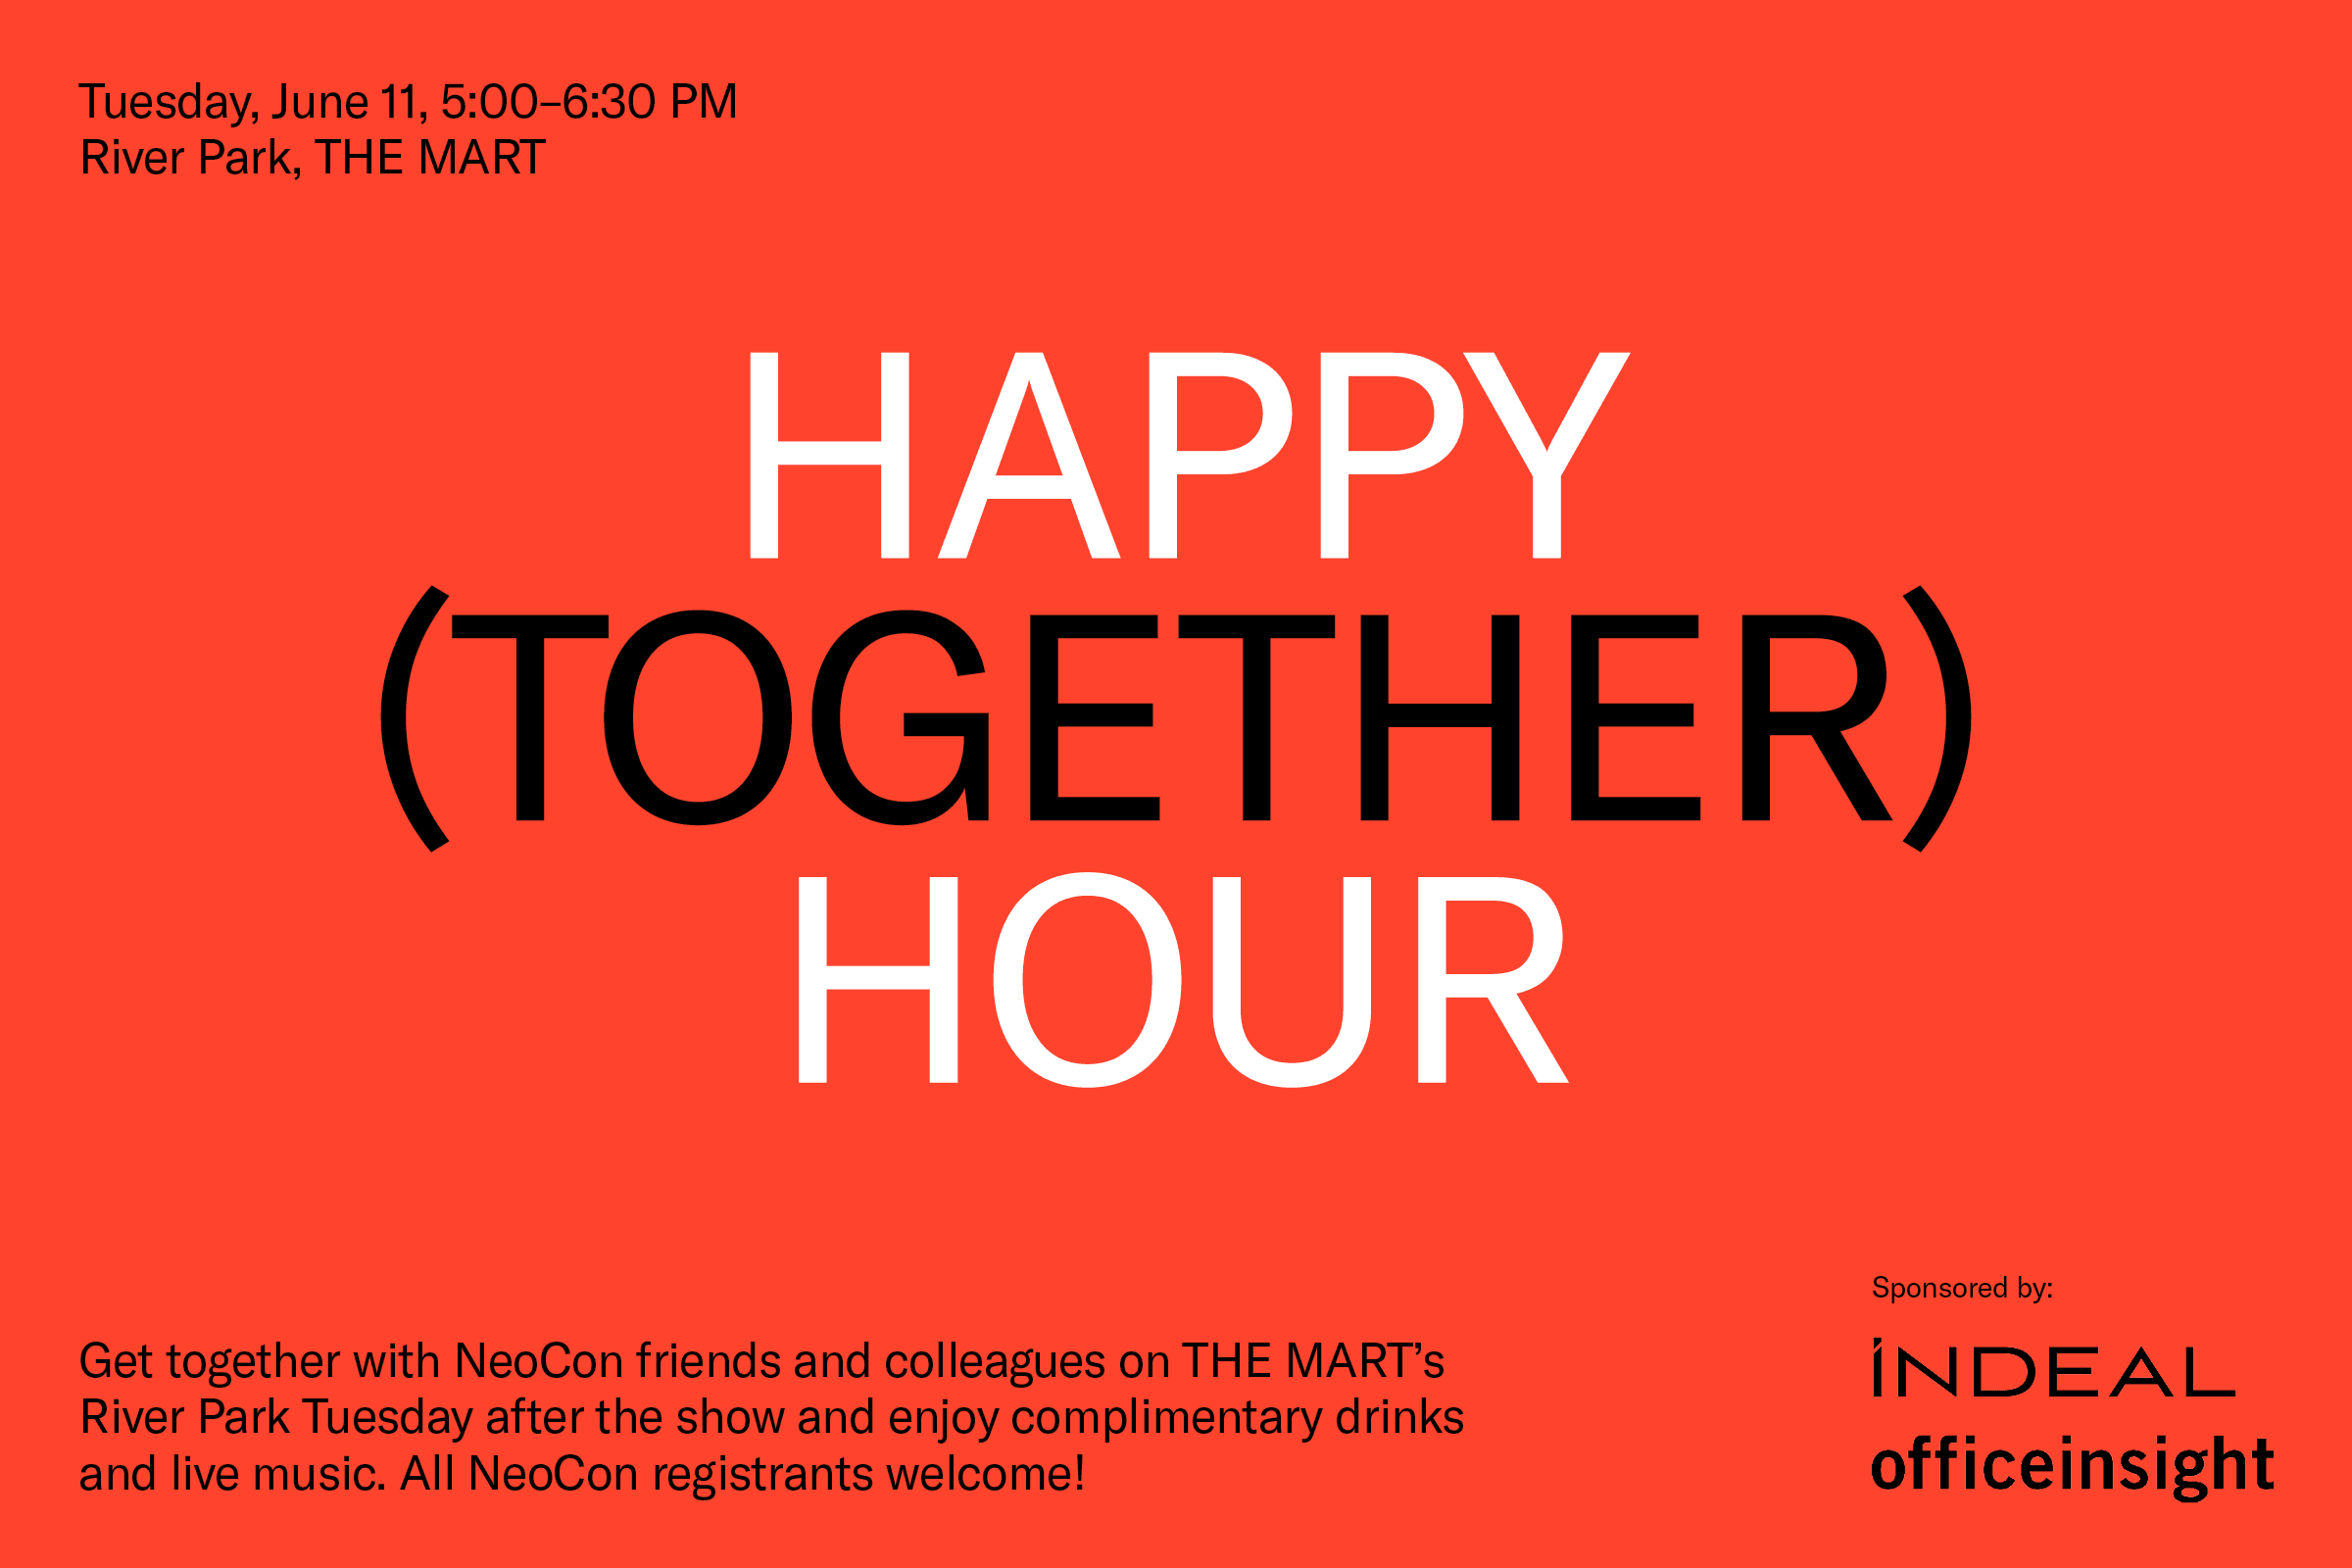 Happy (Together) Hour